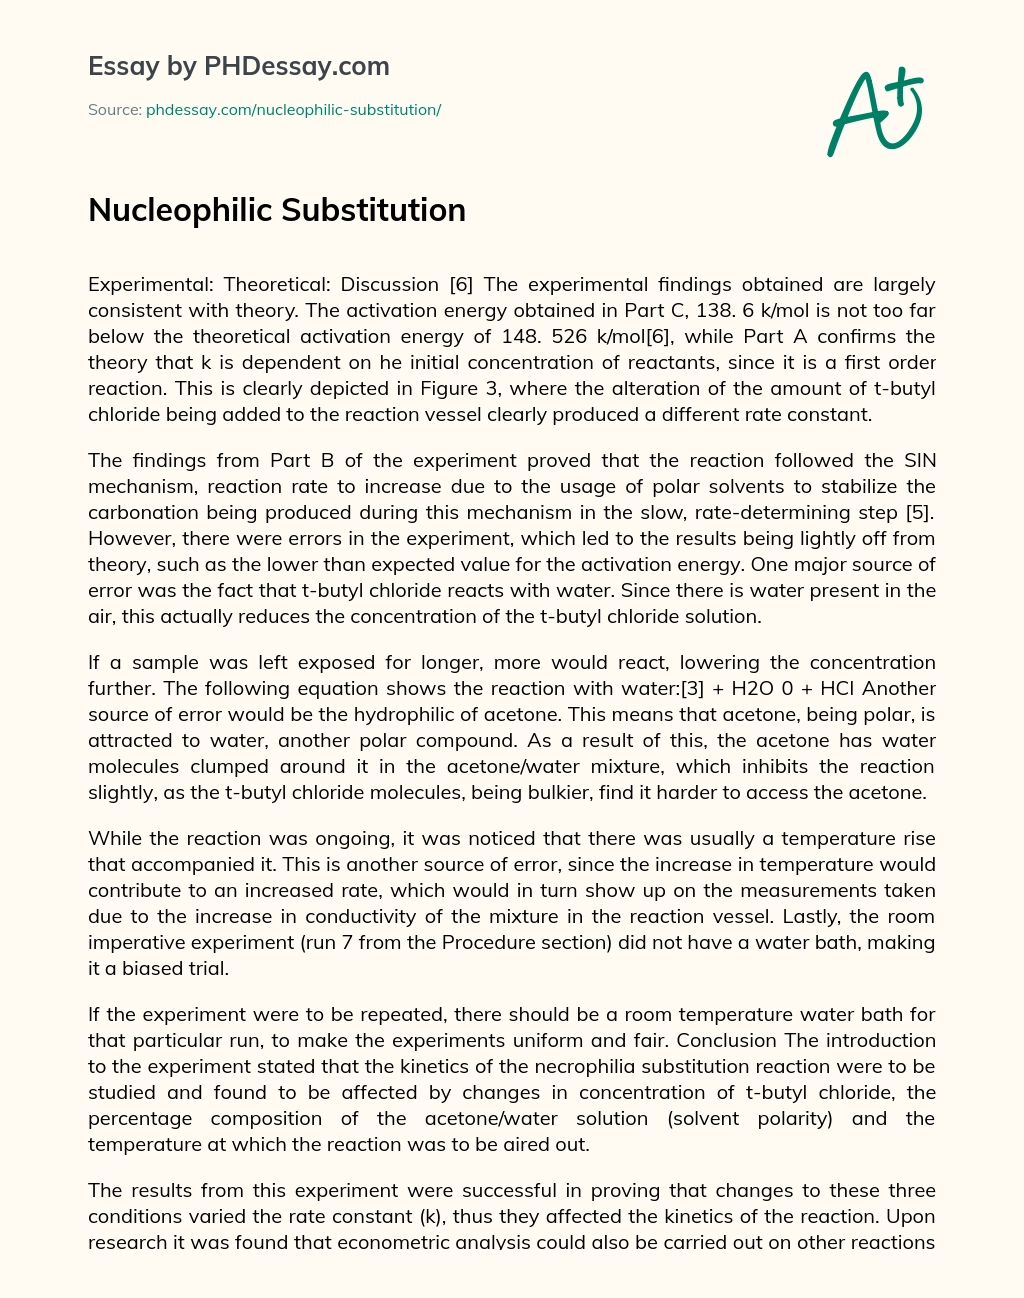 Nucleophilic Substitution essay